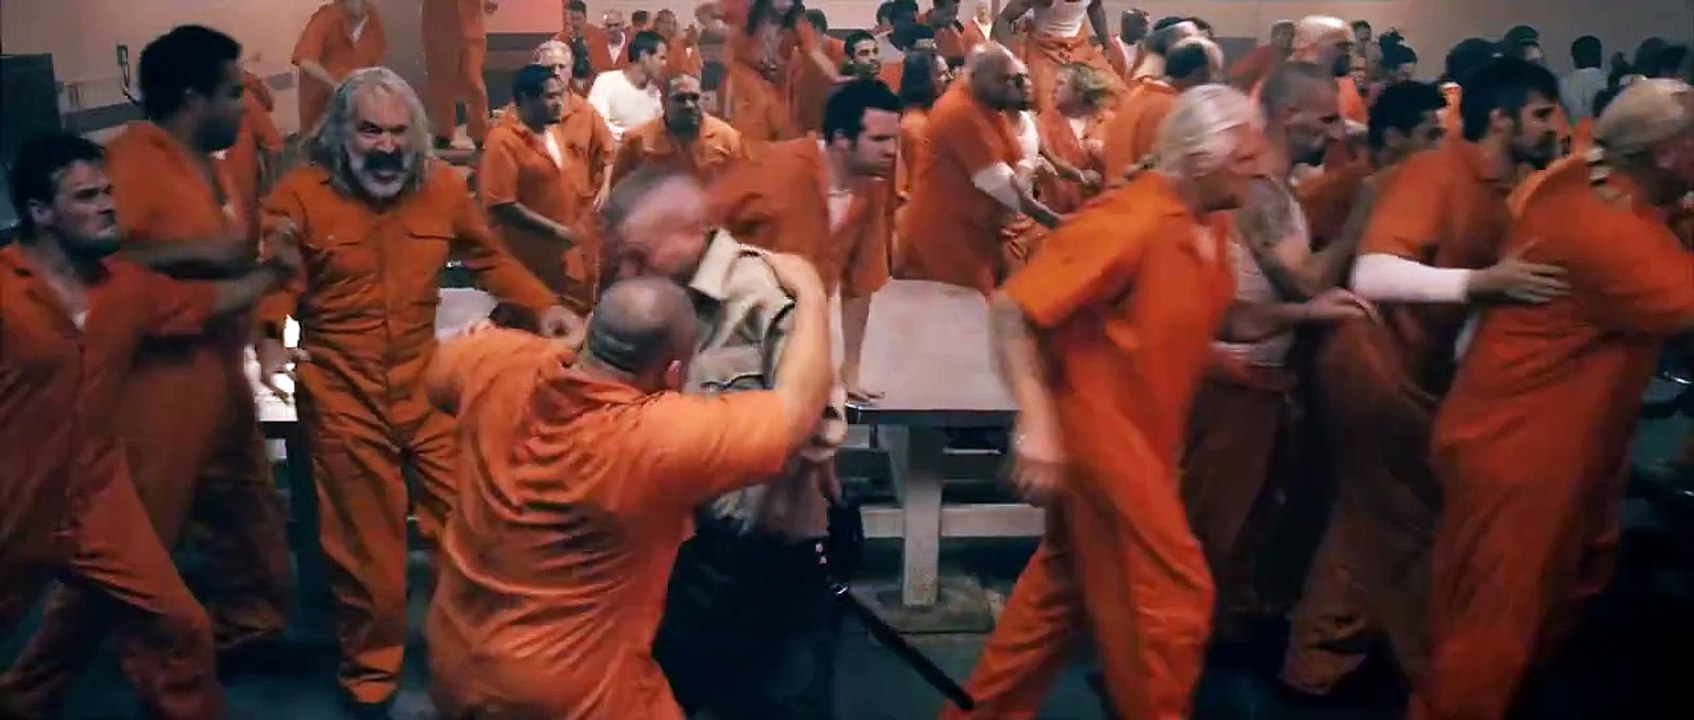 The Human Centipede 3 (Final Sequence) Trailer DF